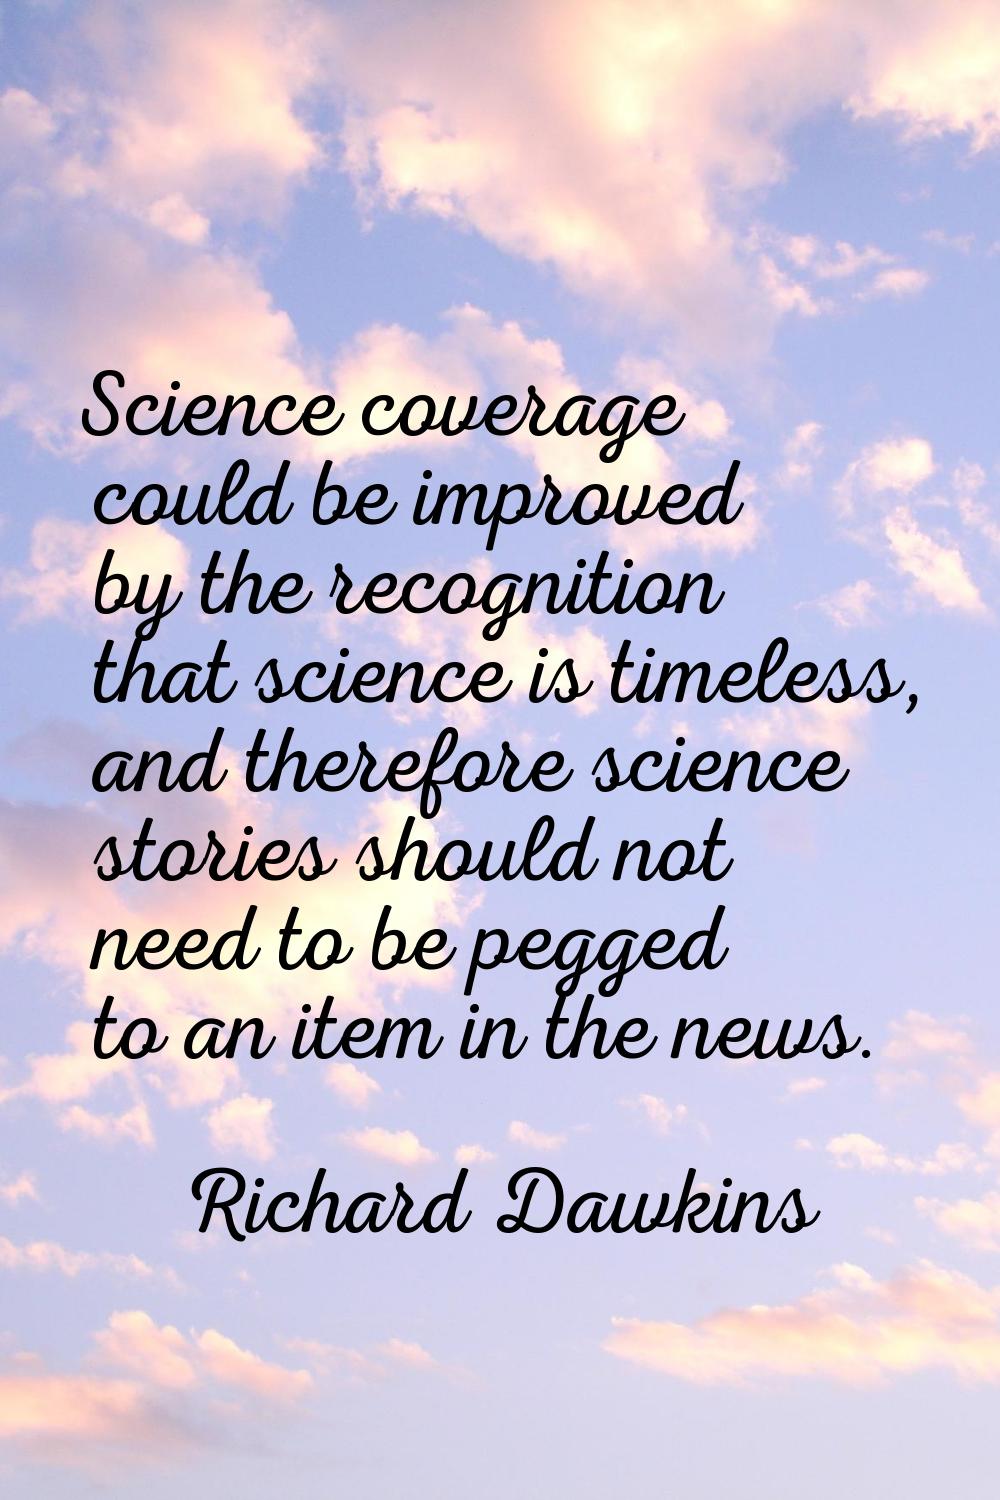 Science coverage could be improved by the recognition that science is timeless, and therefore scien